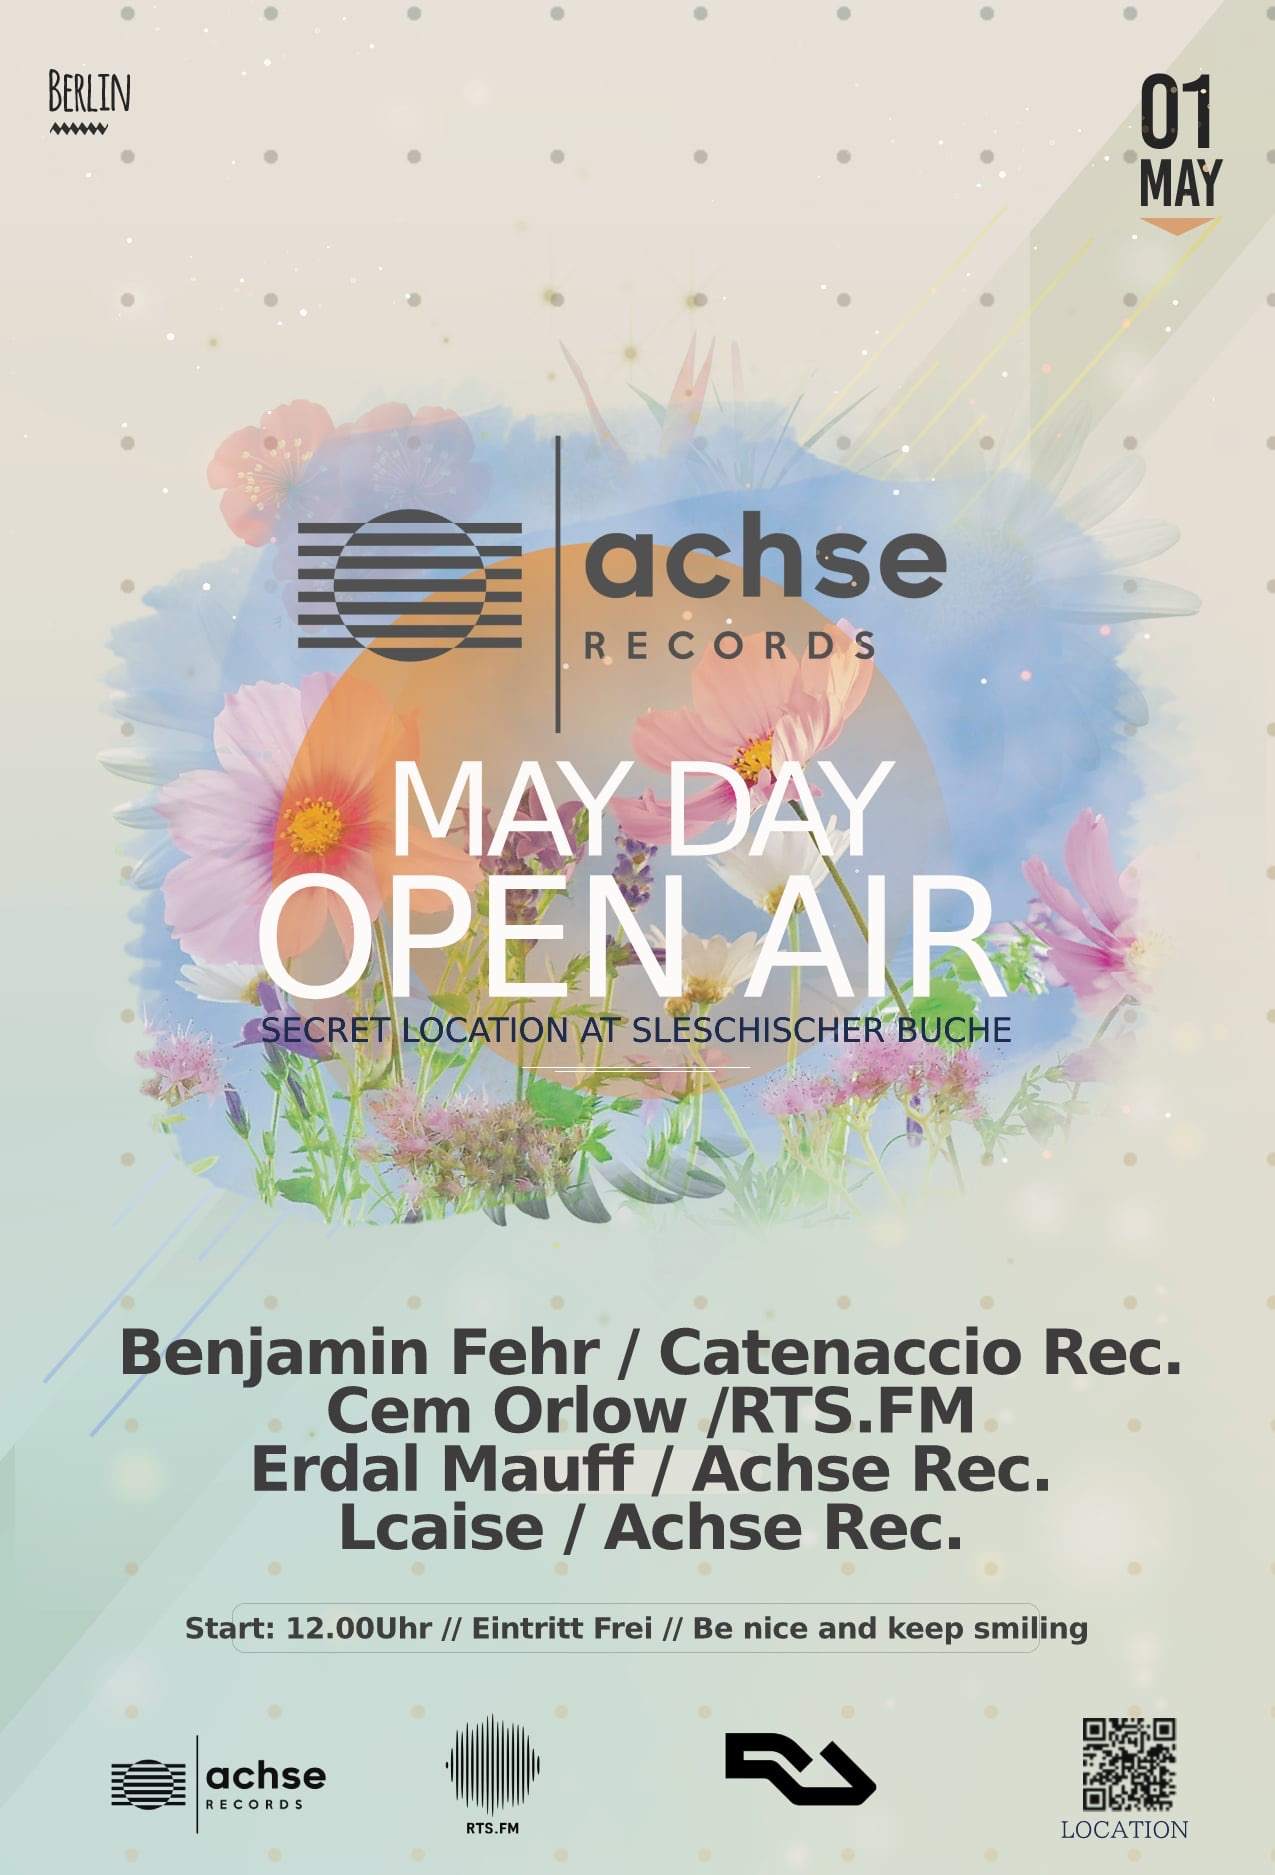 Cancelled: Achse Records May Day Open Air - Página frontal